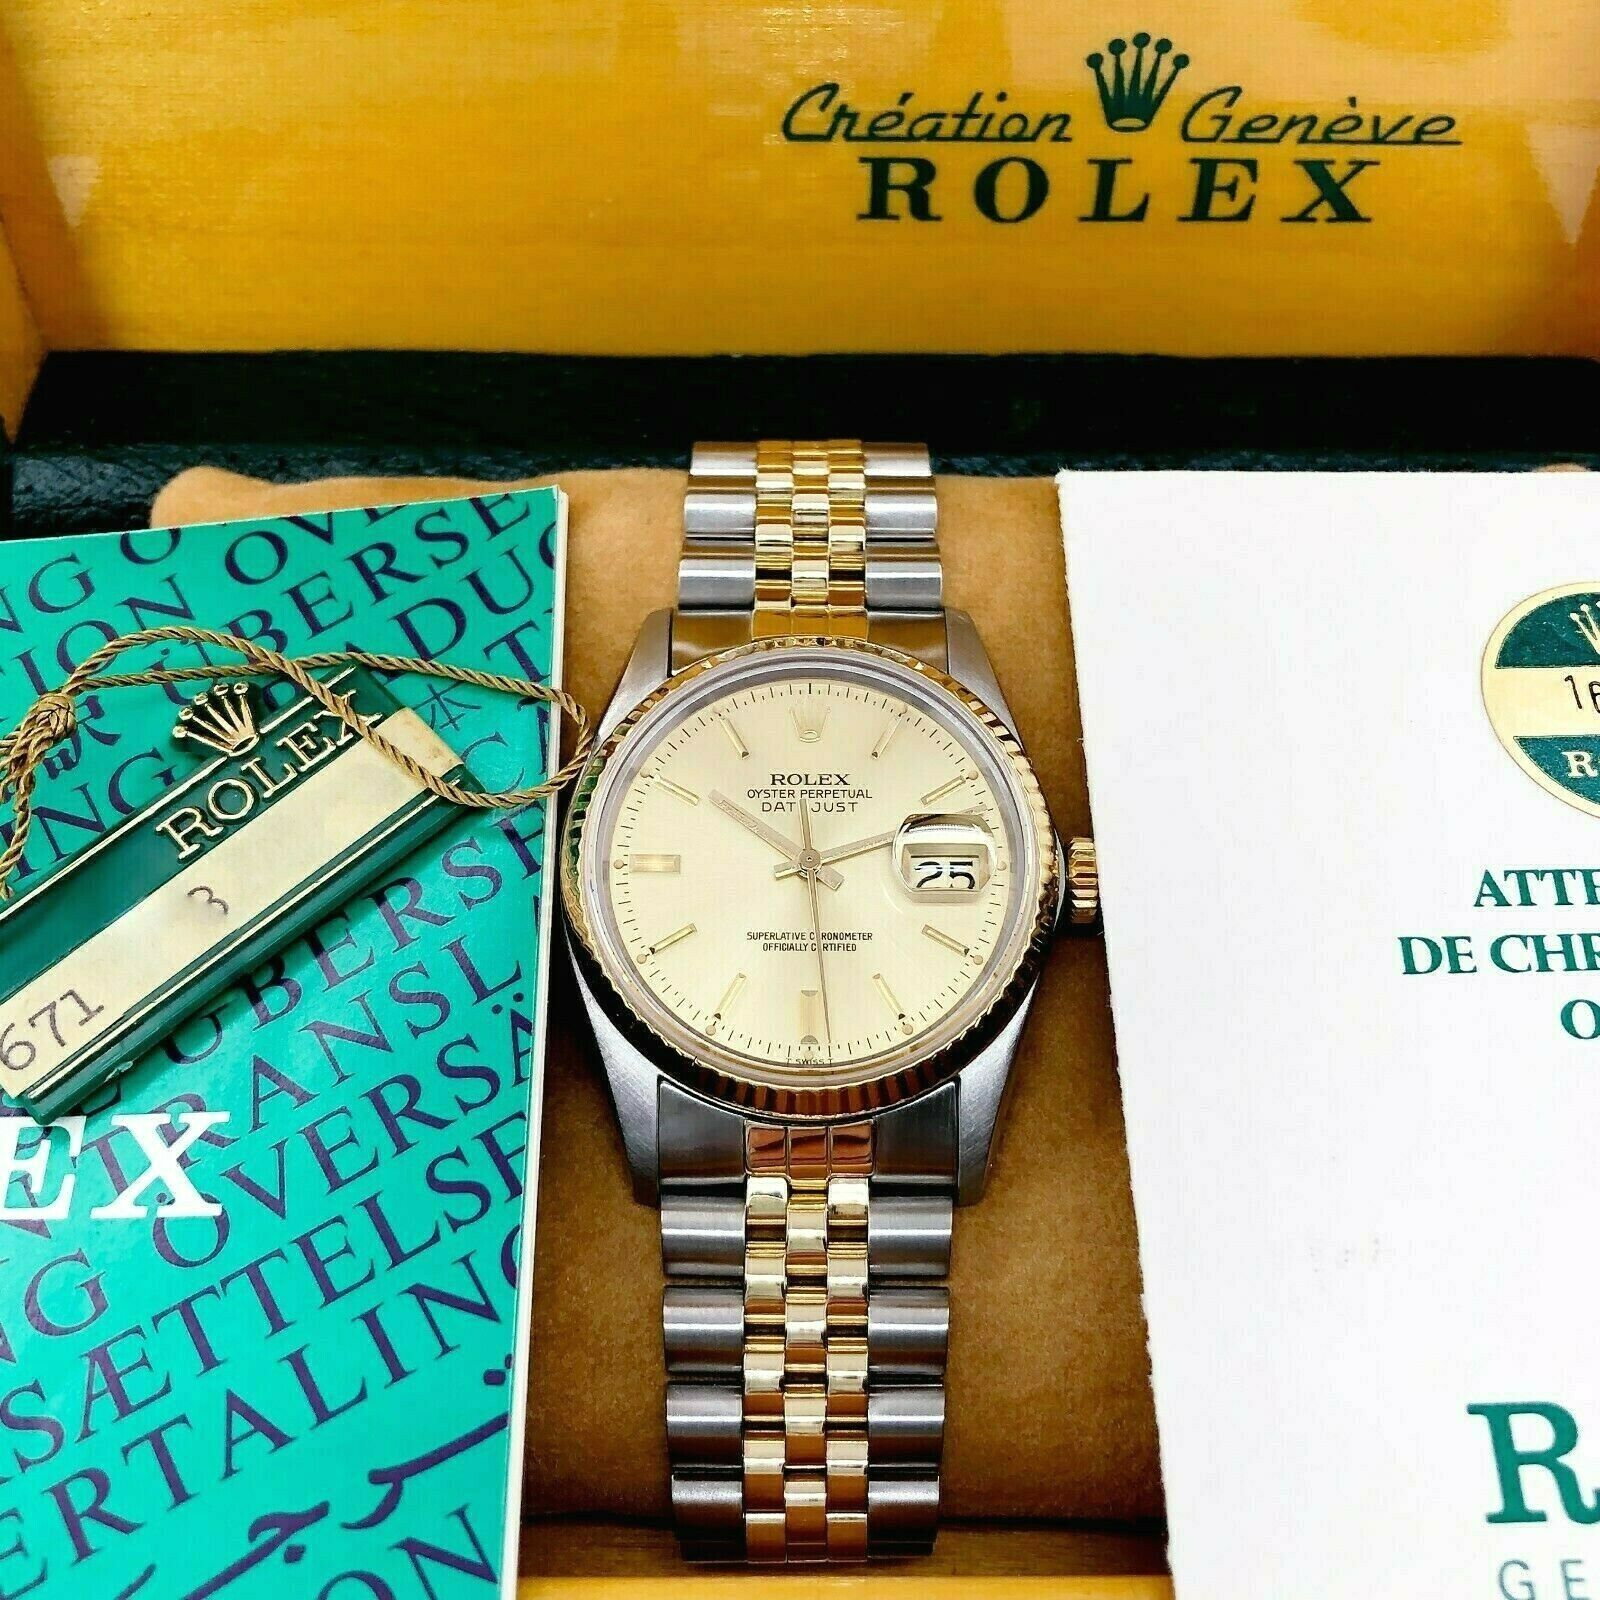 Rolex 36mm Datejust Watch 18K Yellow Gold Stainless Steel Ref 16013 Box & Papers